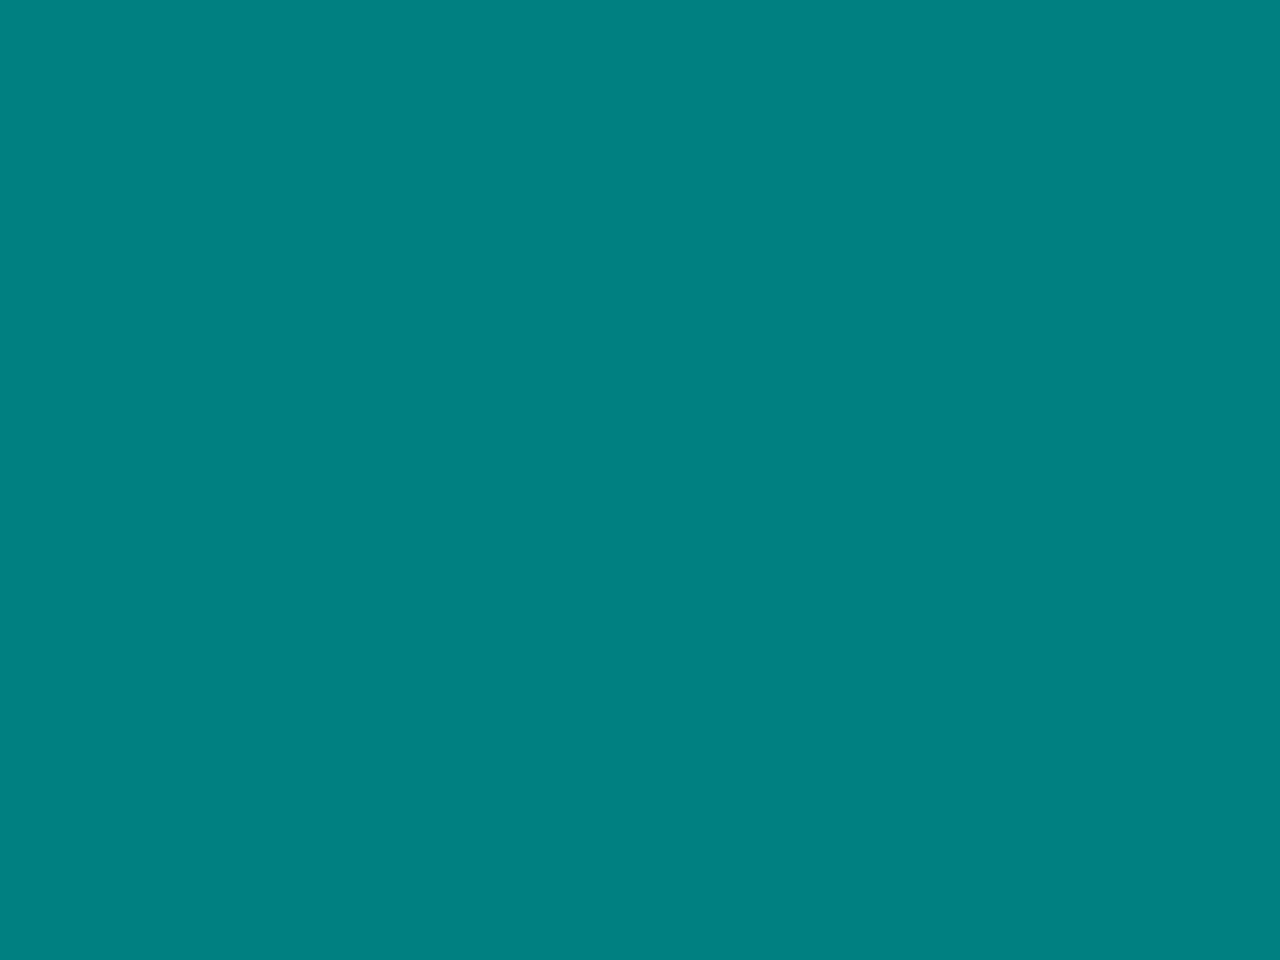 1280x960 Teal Solid Color Background